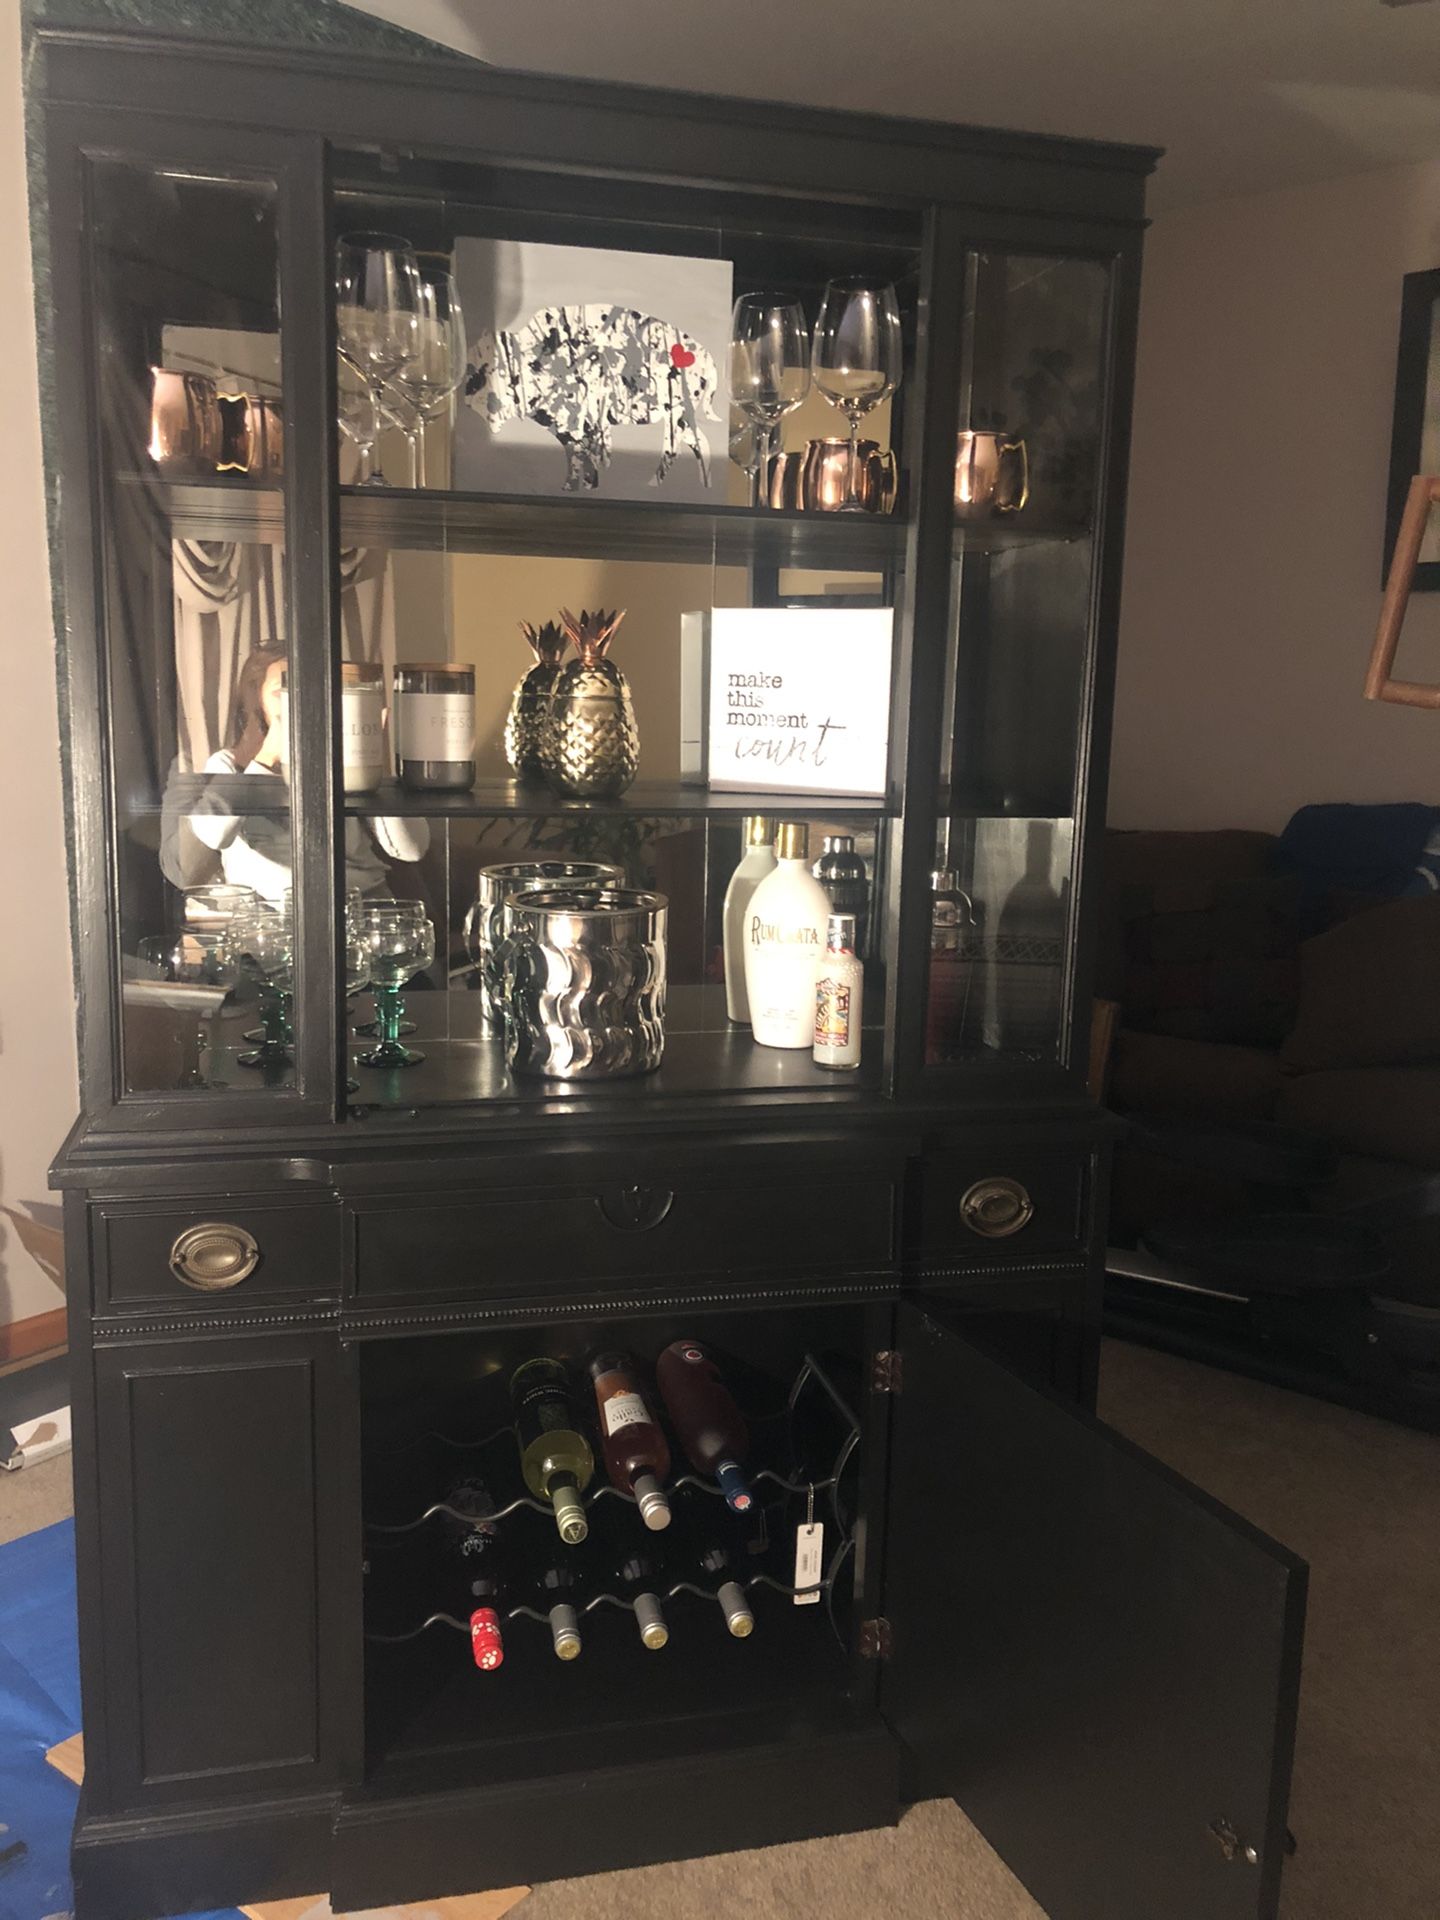 Cabinet -Can be used as a bar display